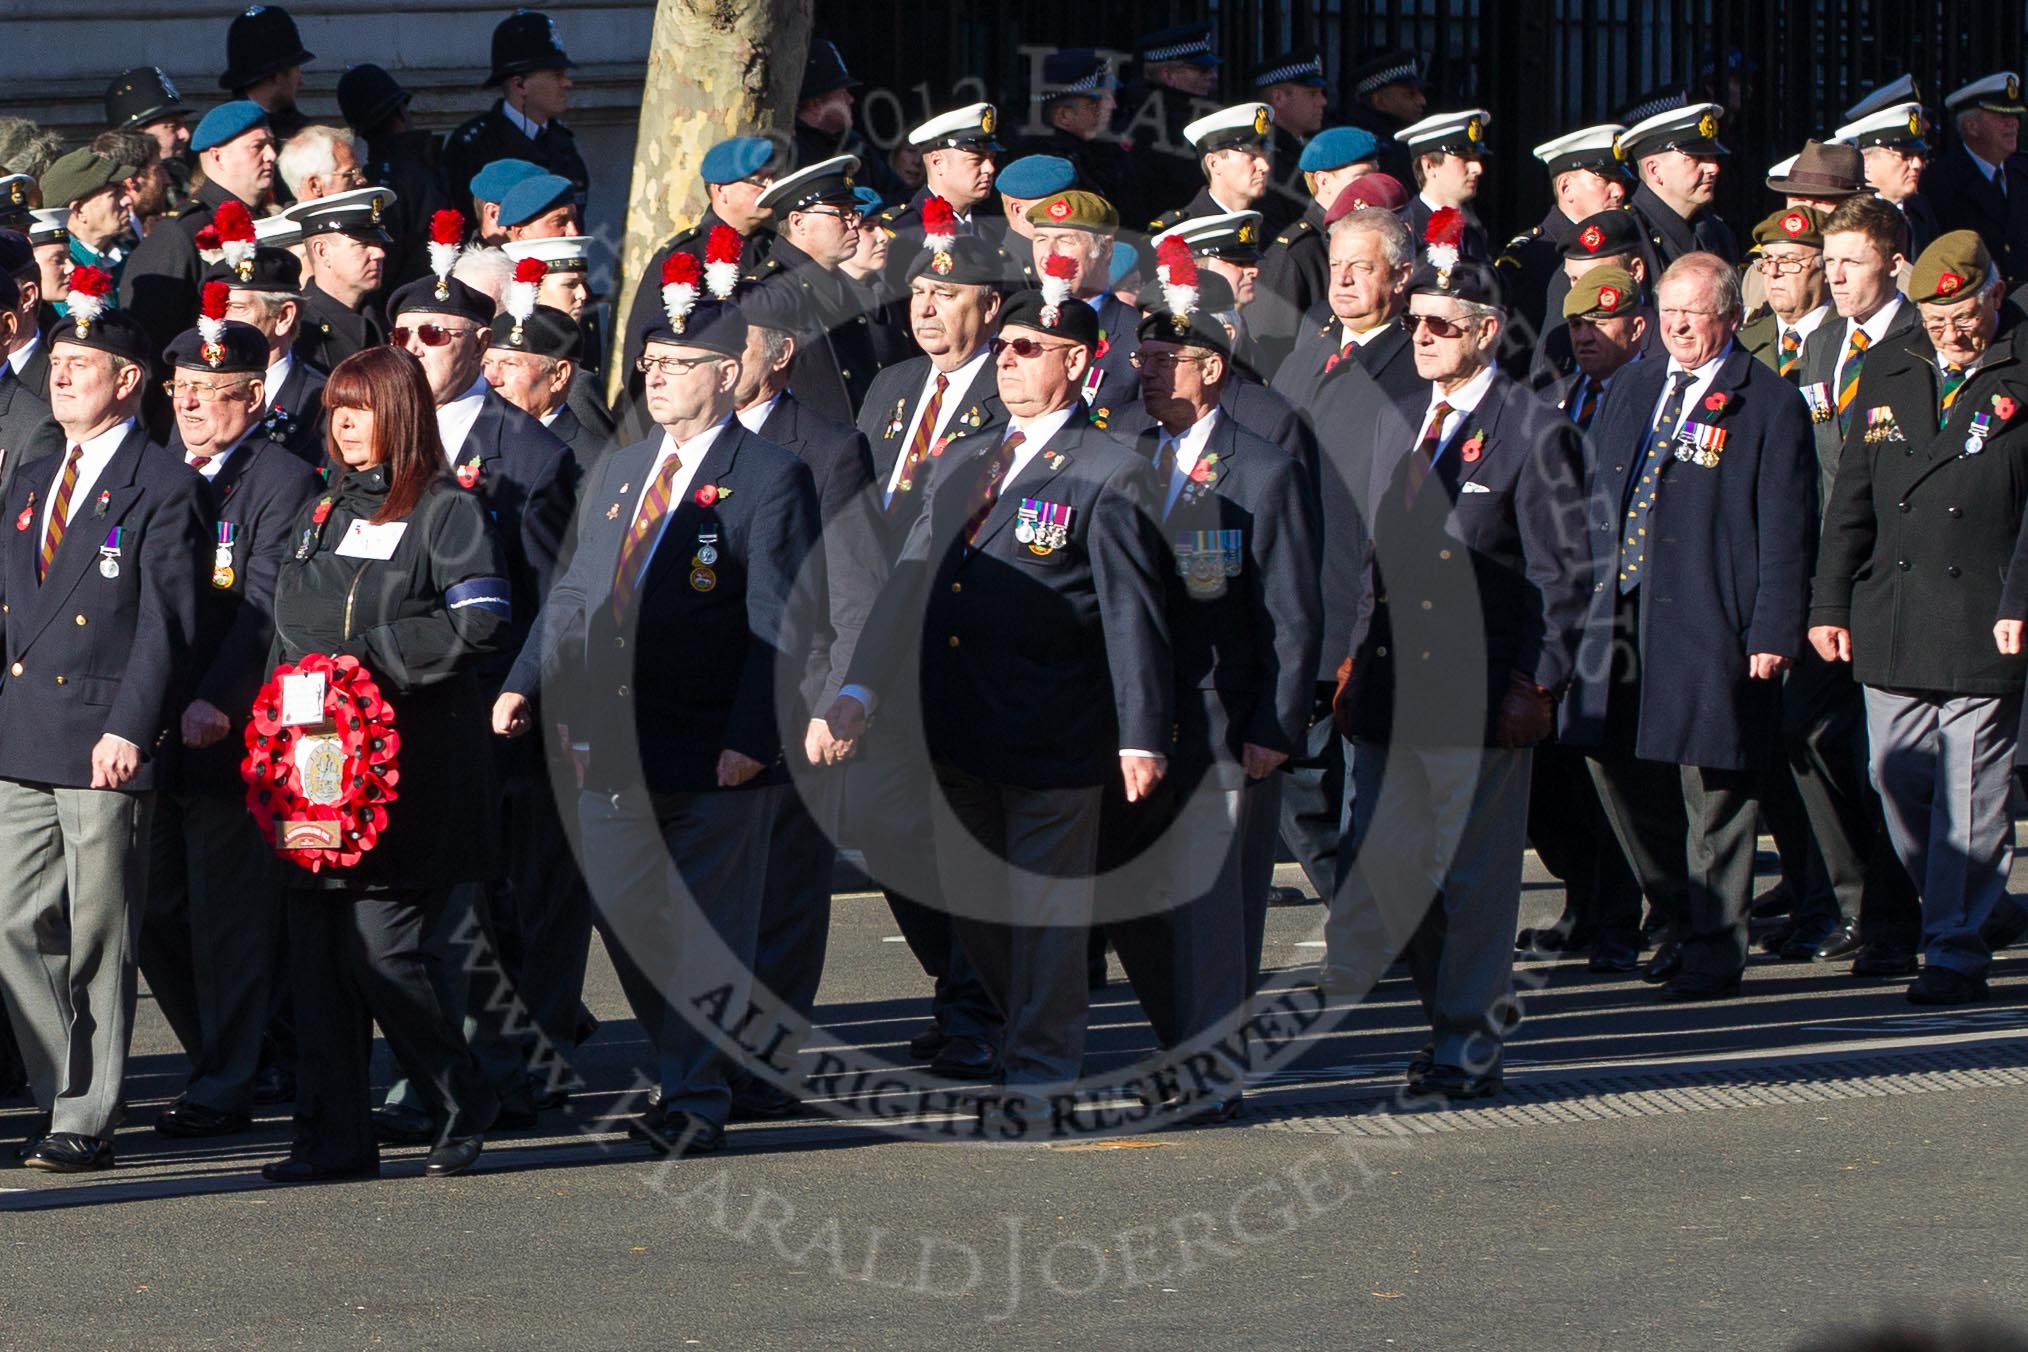 Remembrance Sunday 2012 Cenotaph March Past: Group A7 - Royal Northumberland Fusiliers  and A8 - 
The Duke of Lancaster's Regimental Association..
Whitehall, Cenotaph,
London SW1,

United Kingdom,
on 11 November 2012 at 11:49, image #580